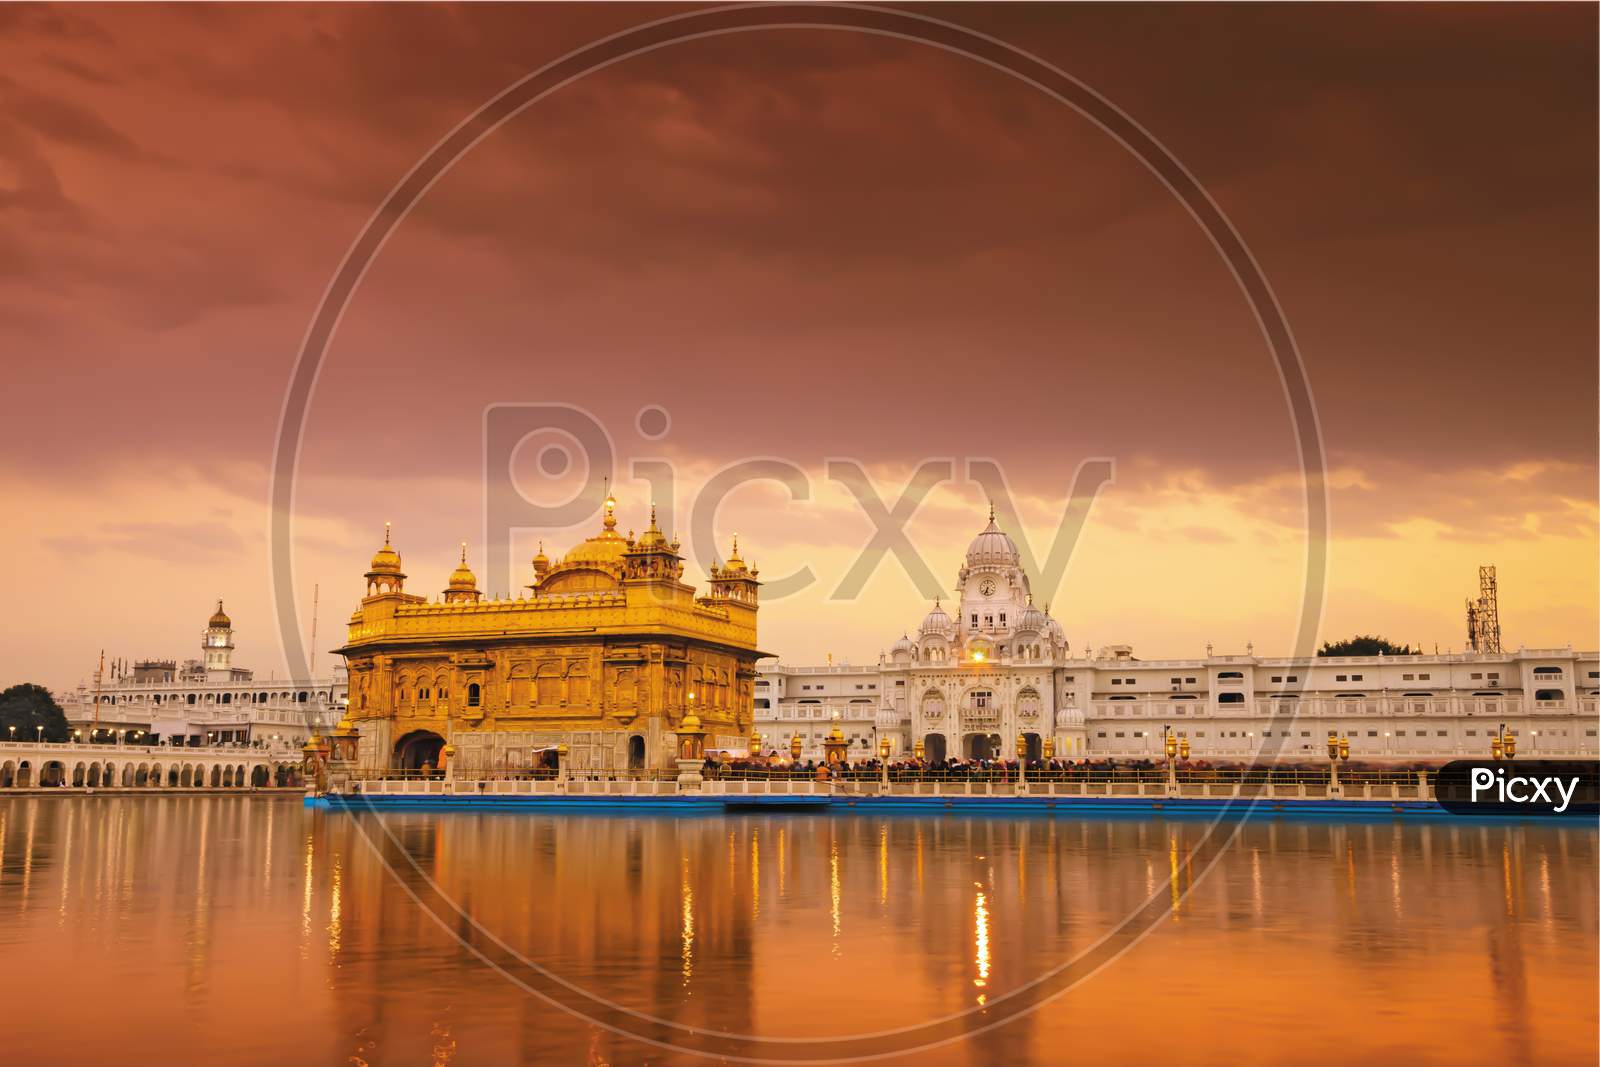 Golden Temple, Amritsar, Punjab In India. Also Known As Harmandir Or Darbar Sahib, The Temple Is A White And Gold Majestic Muslim Building